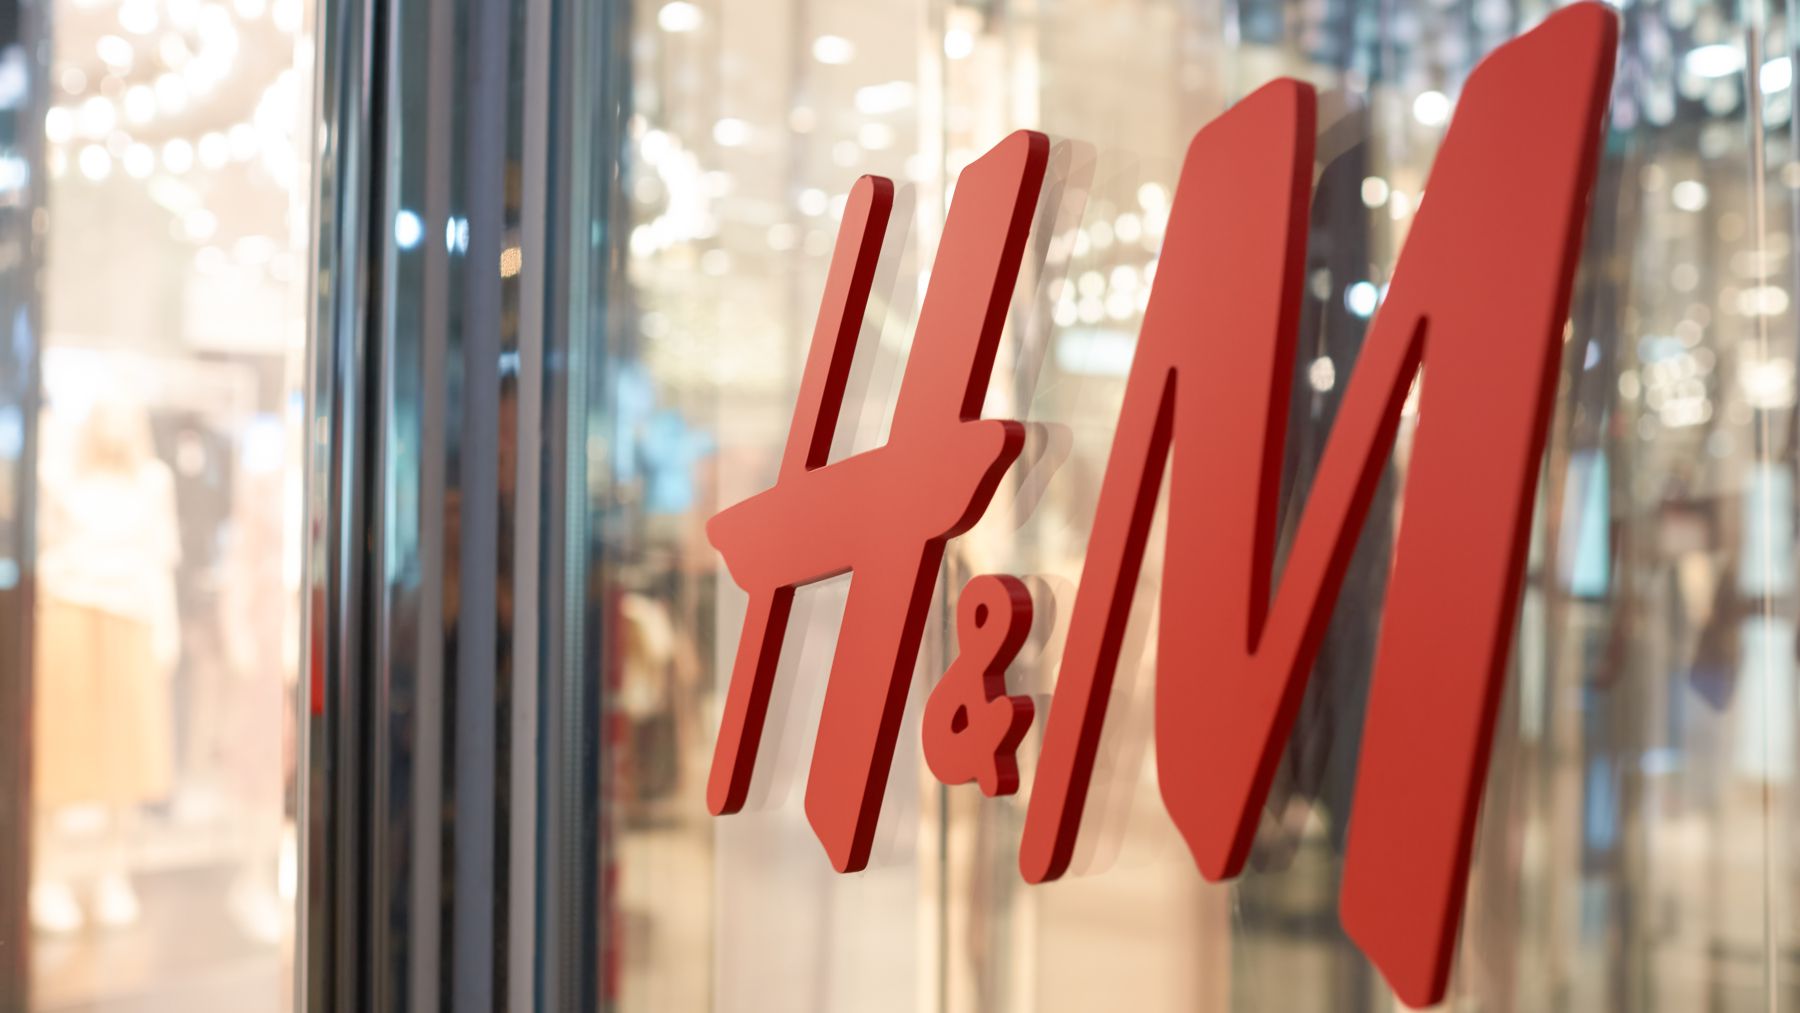 H&M Drops as Surging Costs Nearly Wipe Out Earnings